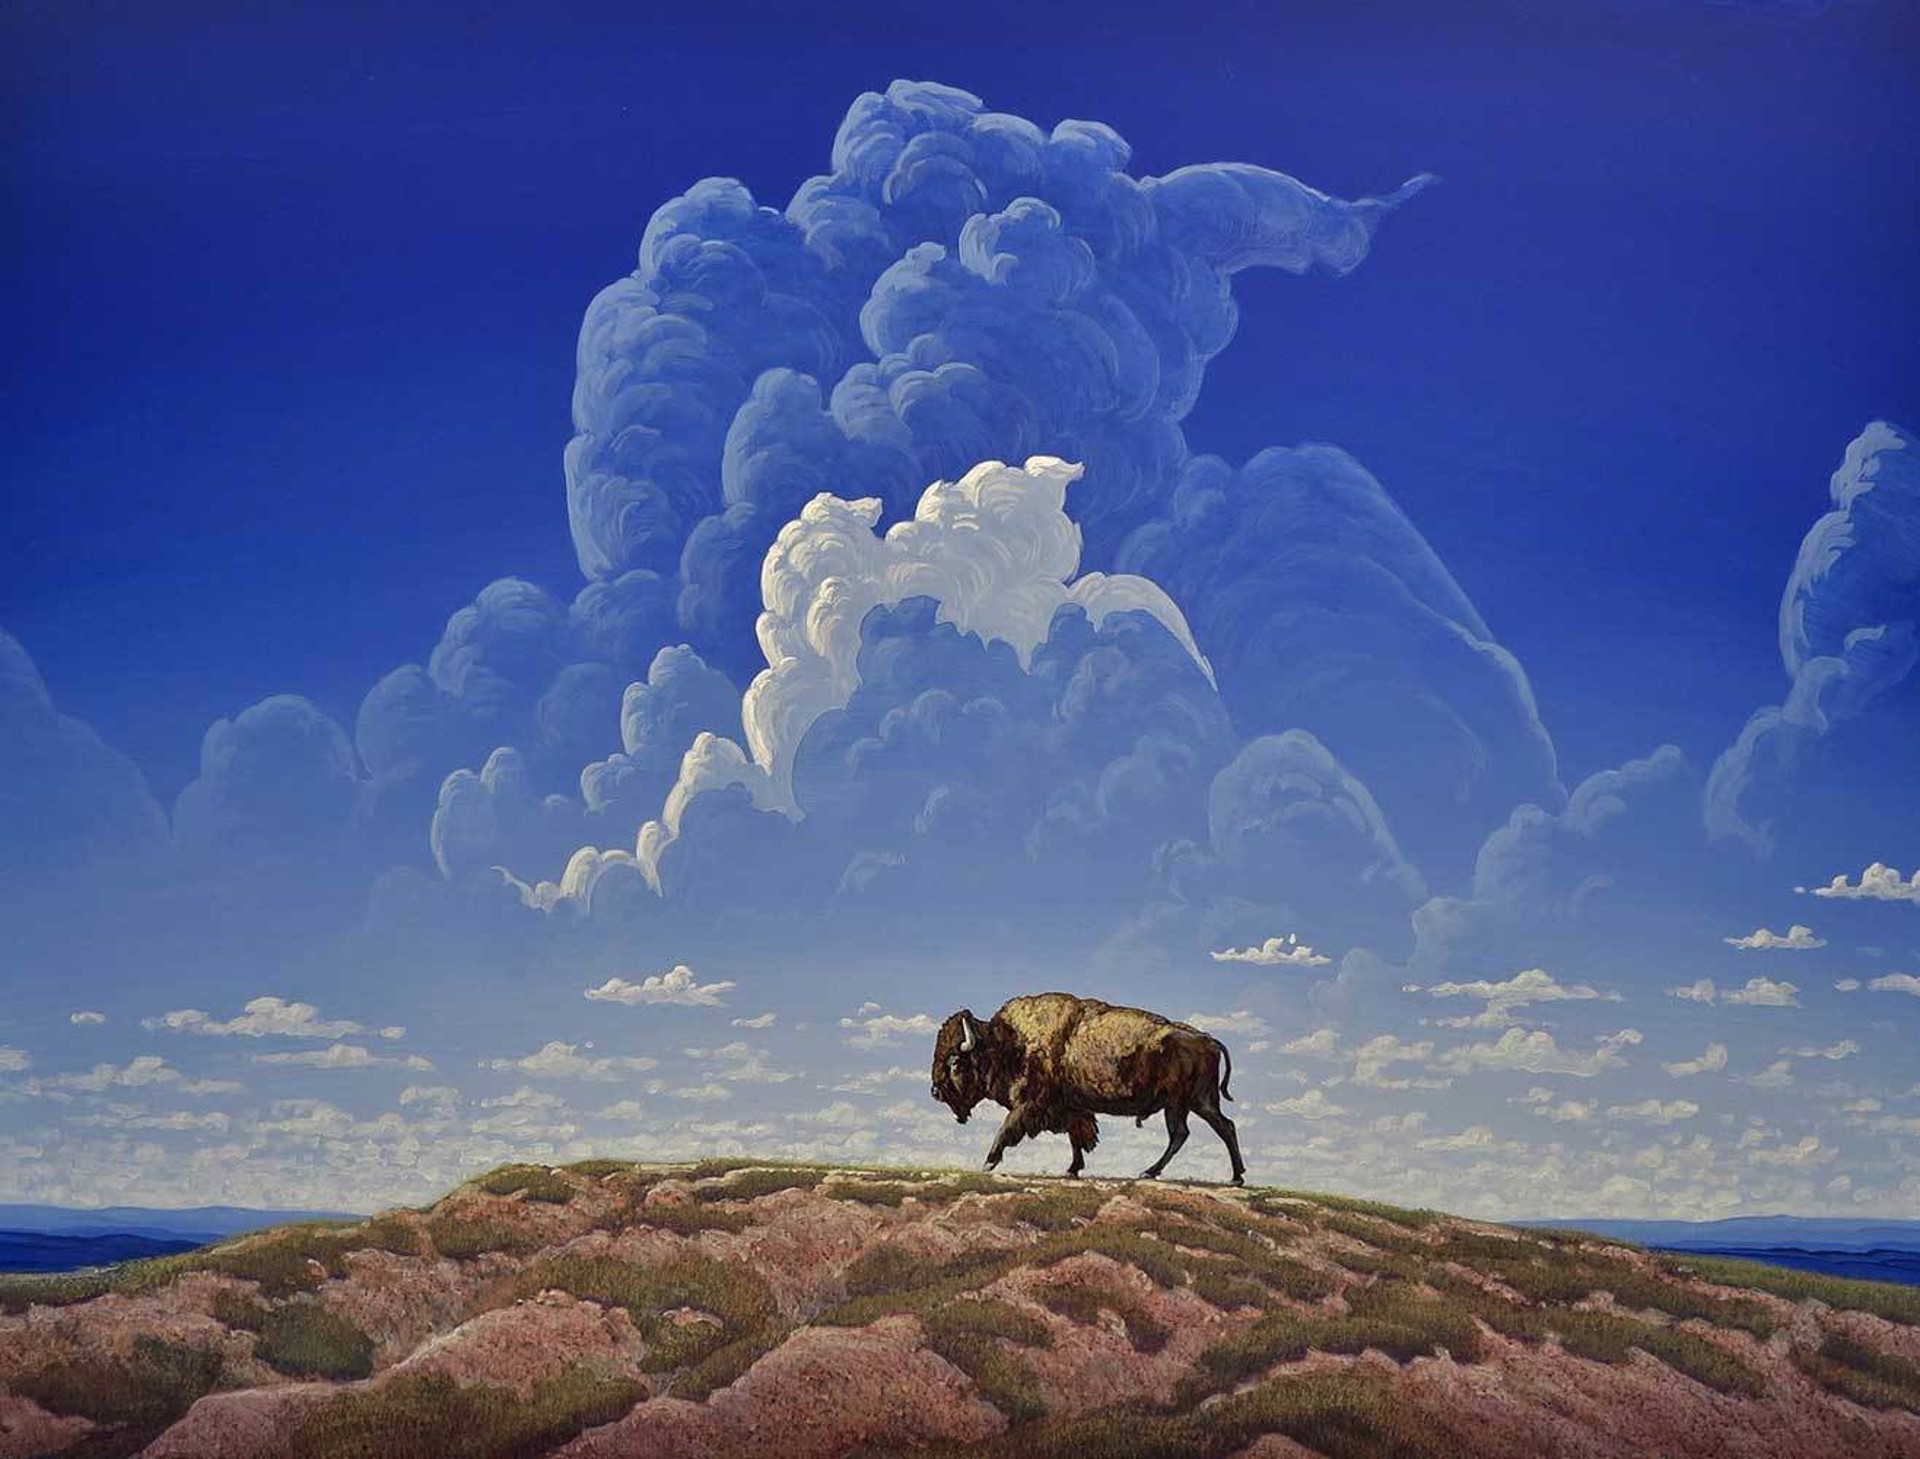 Buffalo with Billowing Clouds by Phil Epp